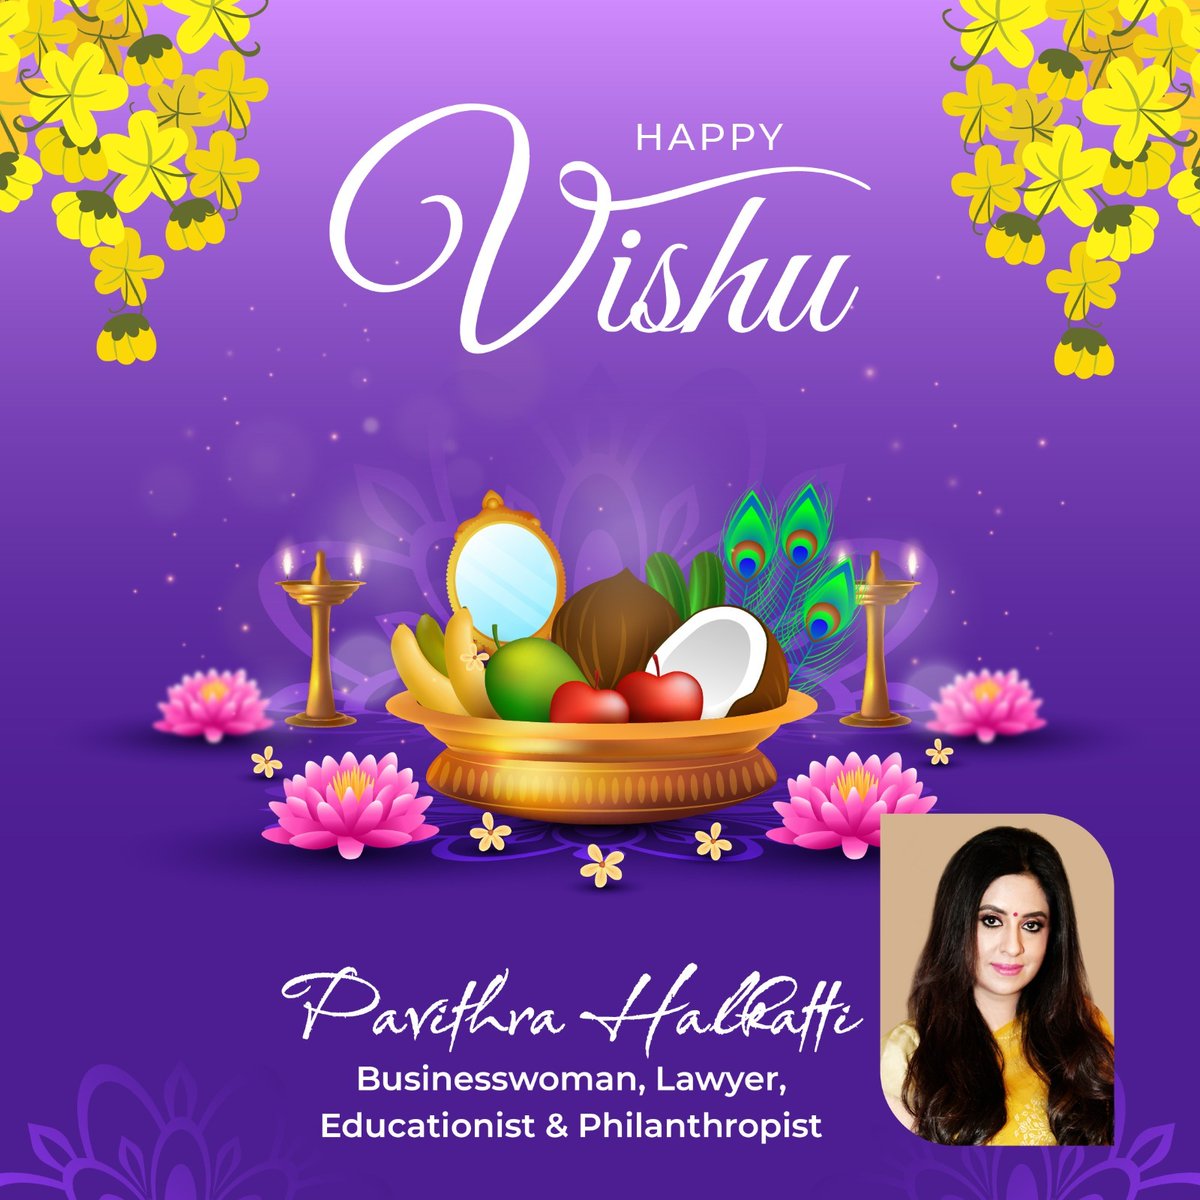 May the new year be filled with success and achievements, and may all your dreams and aspirations come true. Wishing you and your family a joyous and prosperous Vishu!

#HappyVishu #VishuDay #VishuFestival #VishuCelebration #VishuGreeting #VishuBlessings #VishuHappiness…